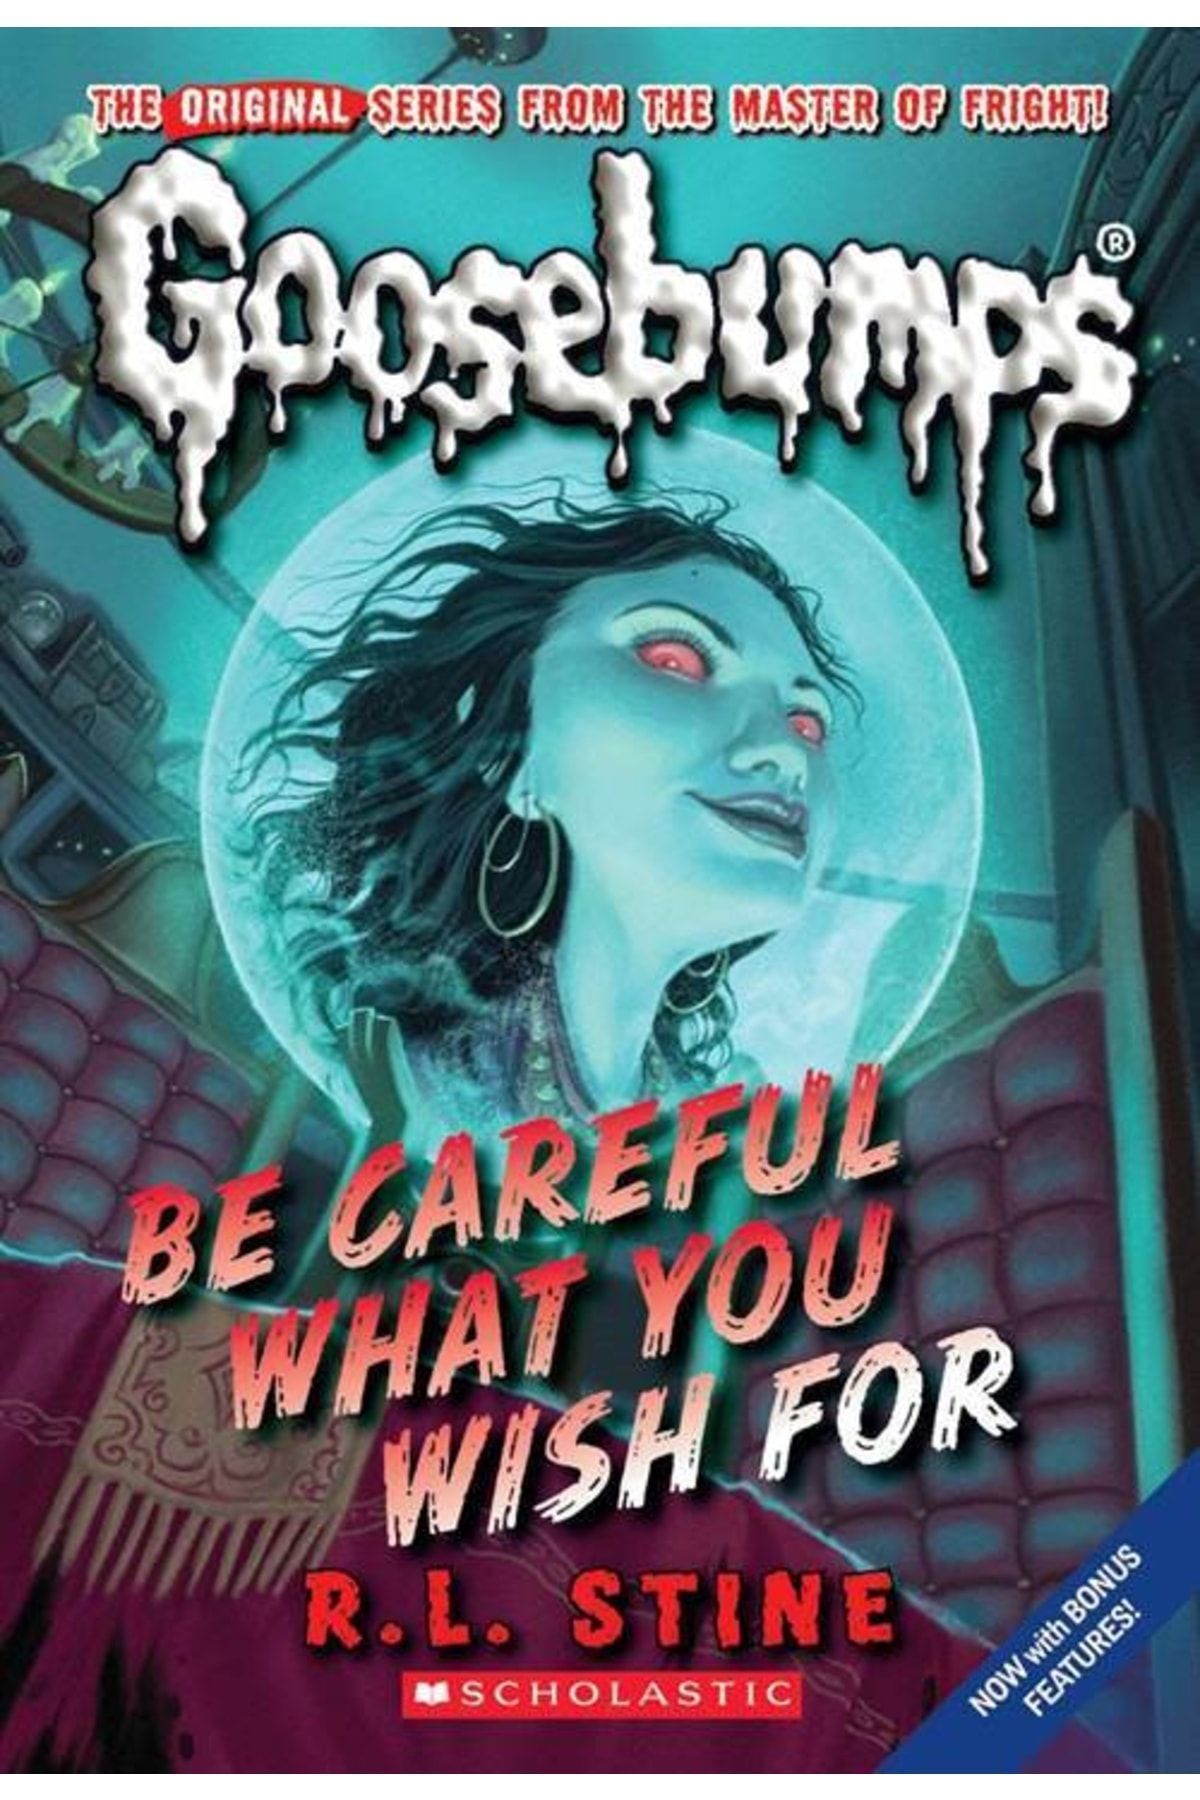 Scholastic Goosebumps 7: Be Careful What You Wish For